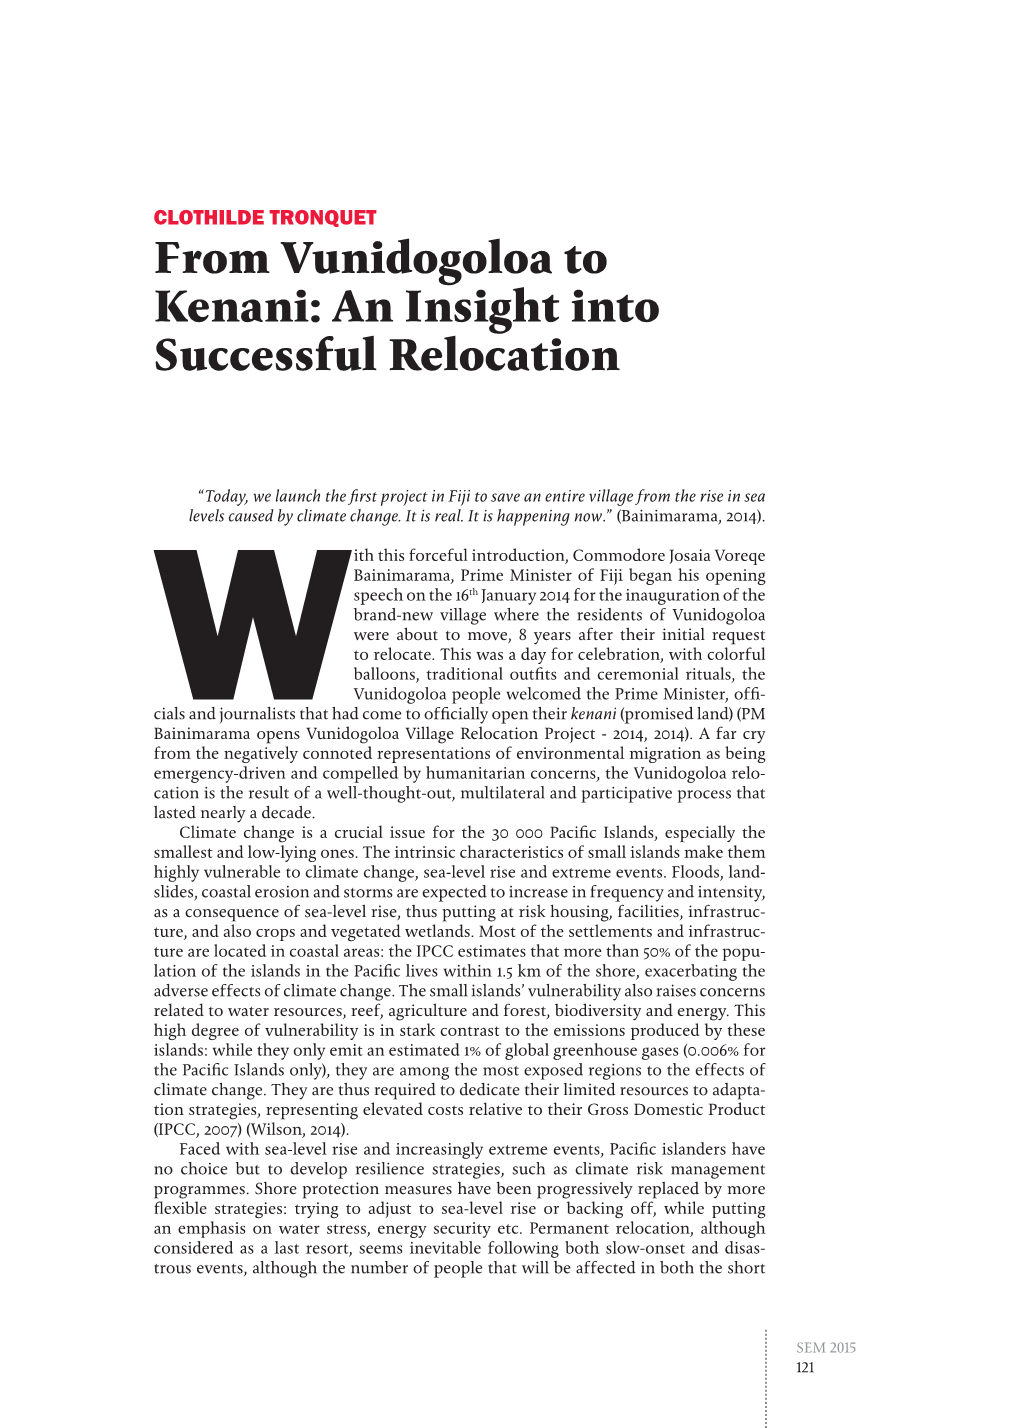 From Vunidogoloa to Kenani: an Insight Into Successful Relocation